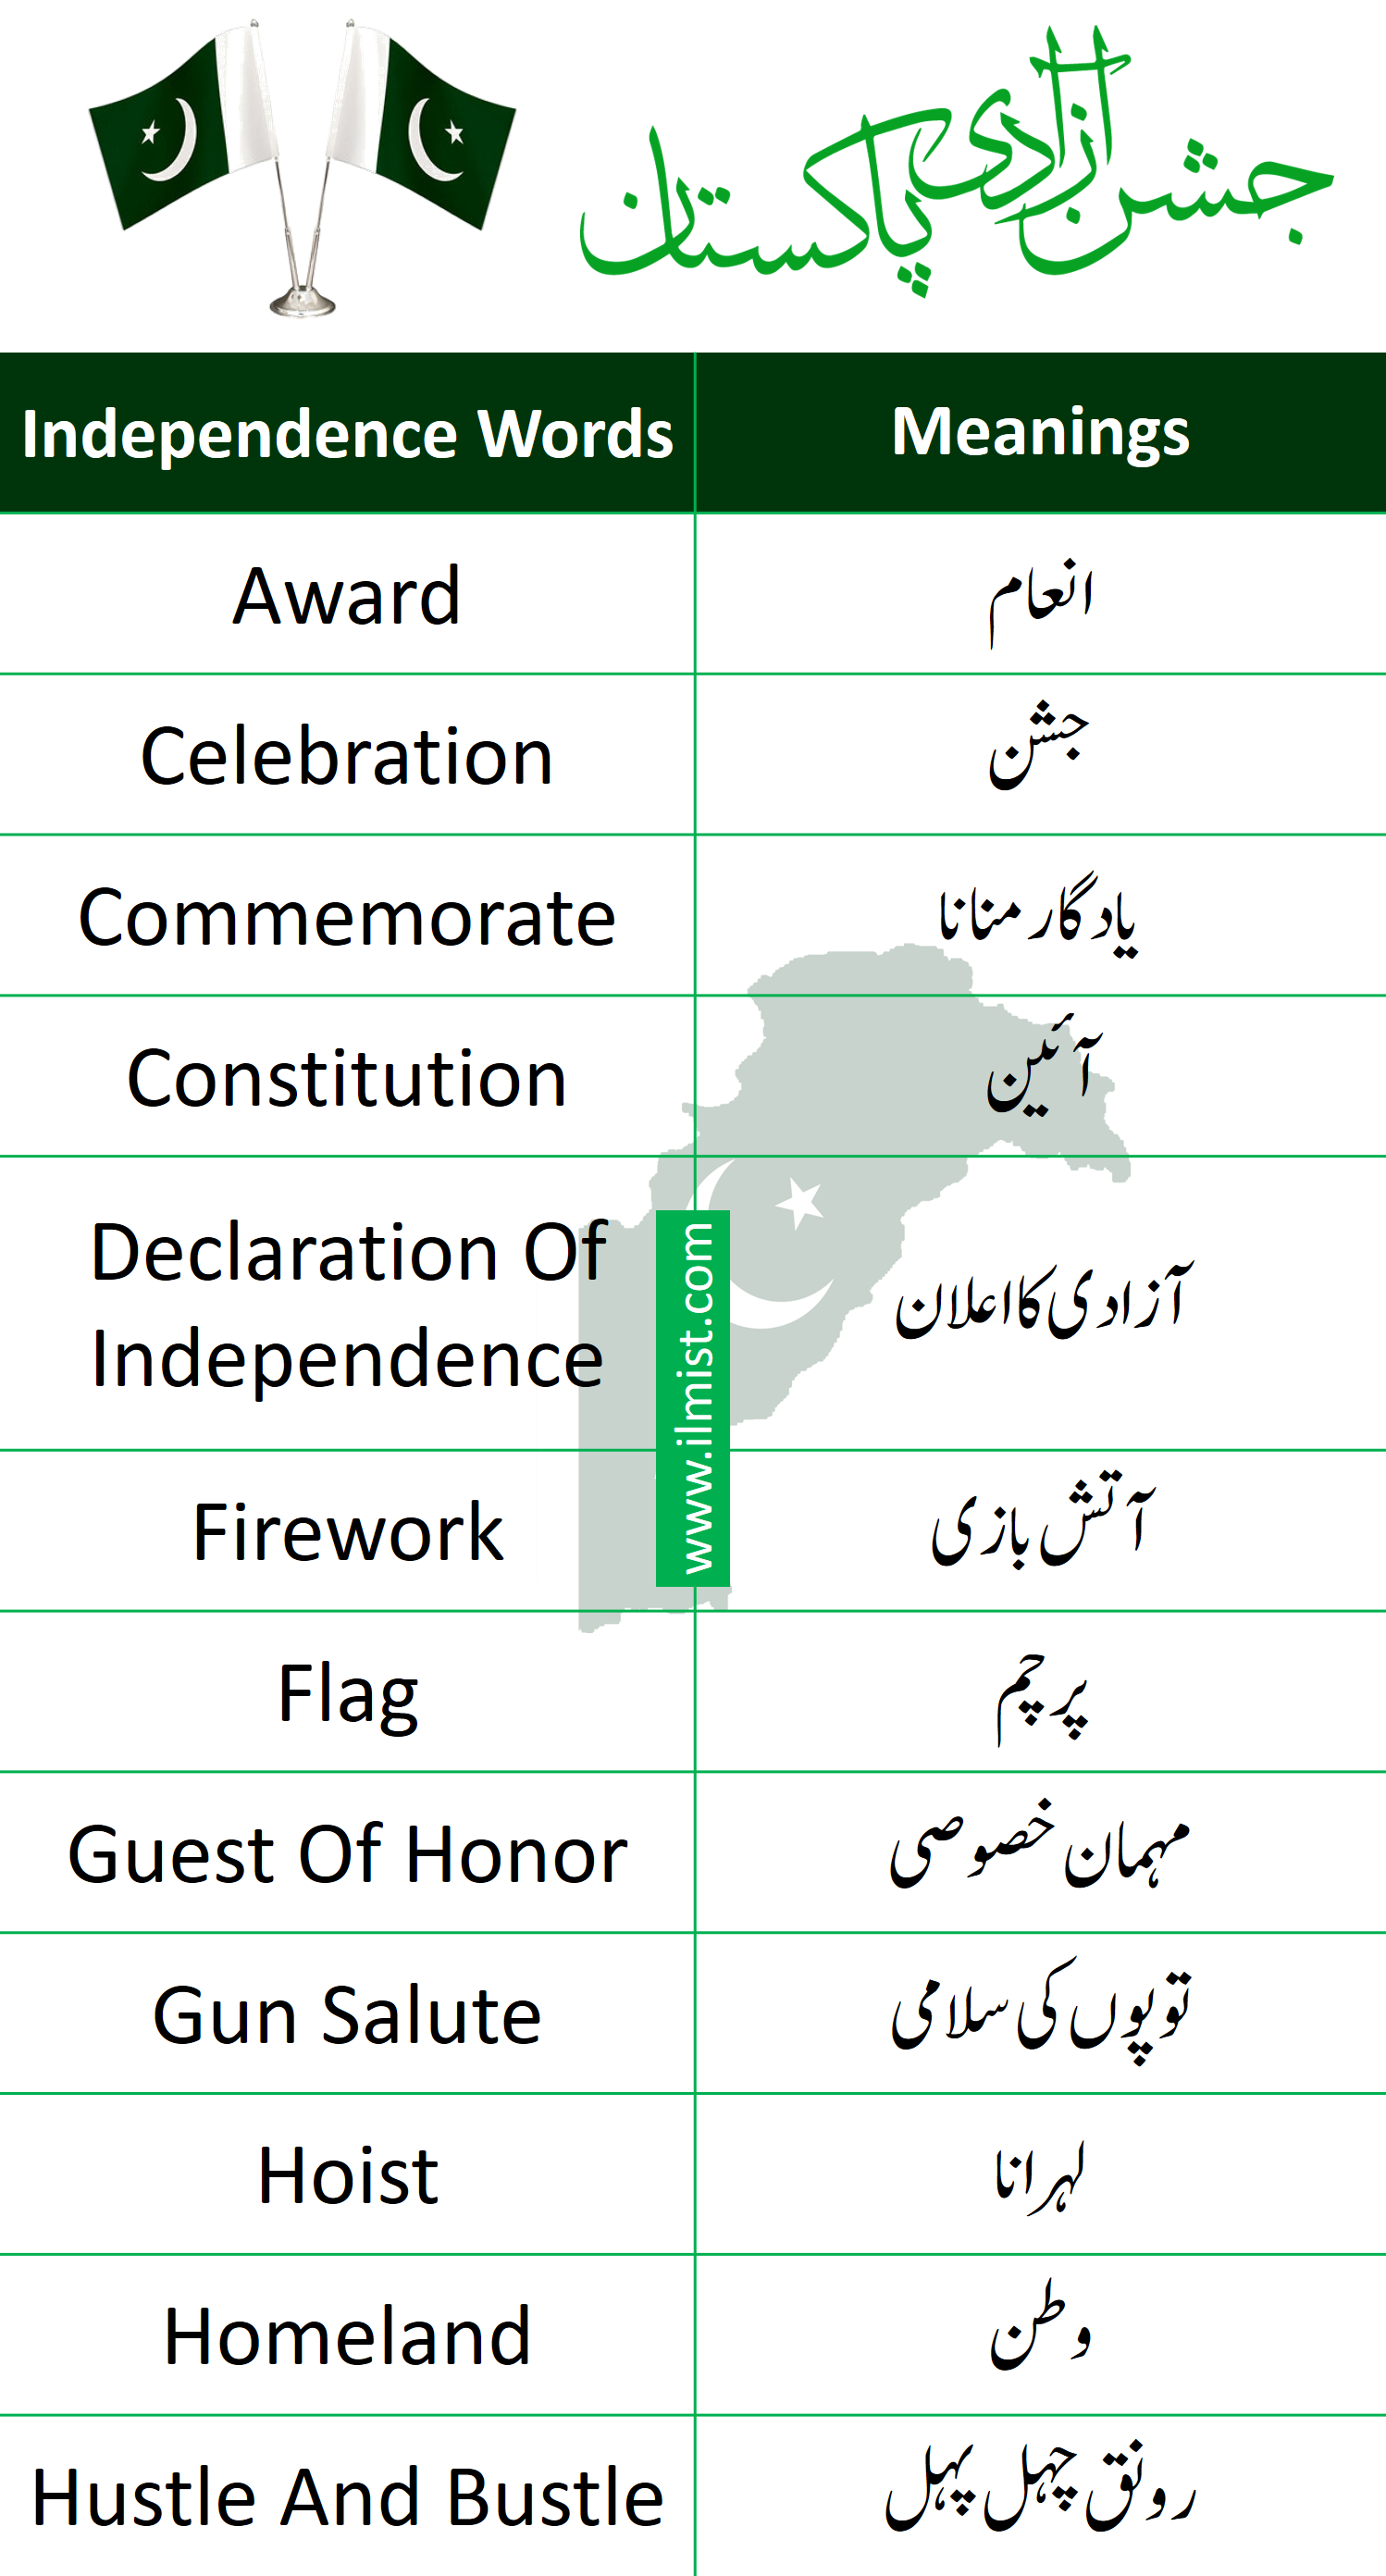 Independence Day Vocabulary & Sentences in Urdu and English